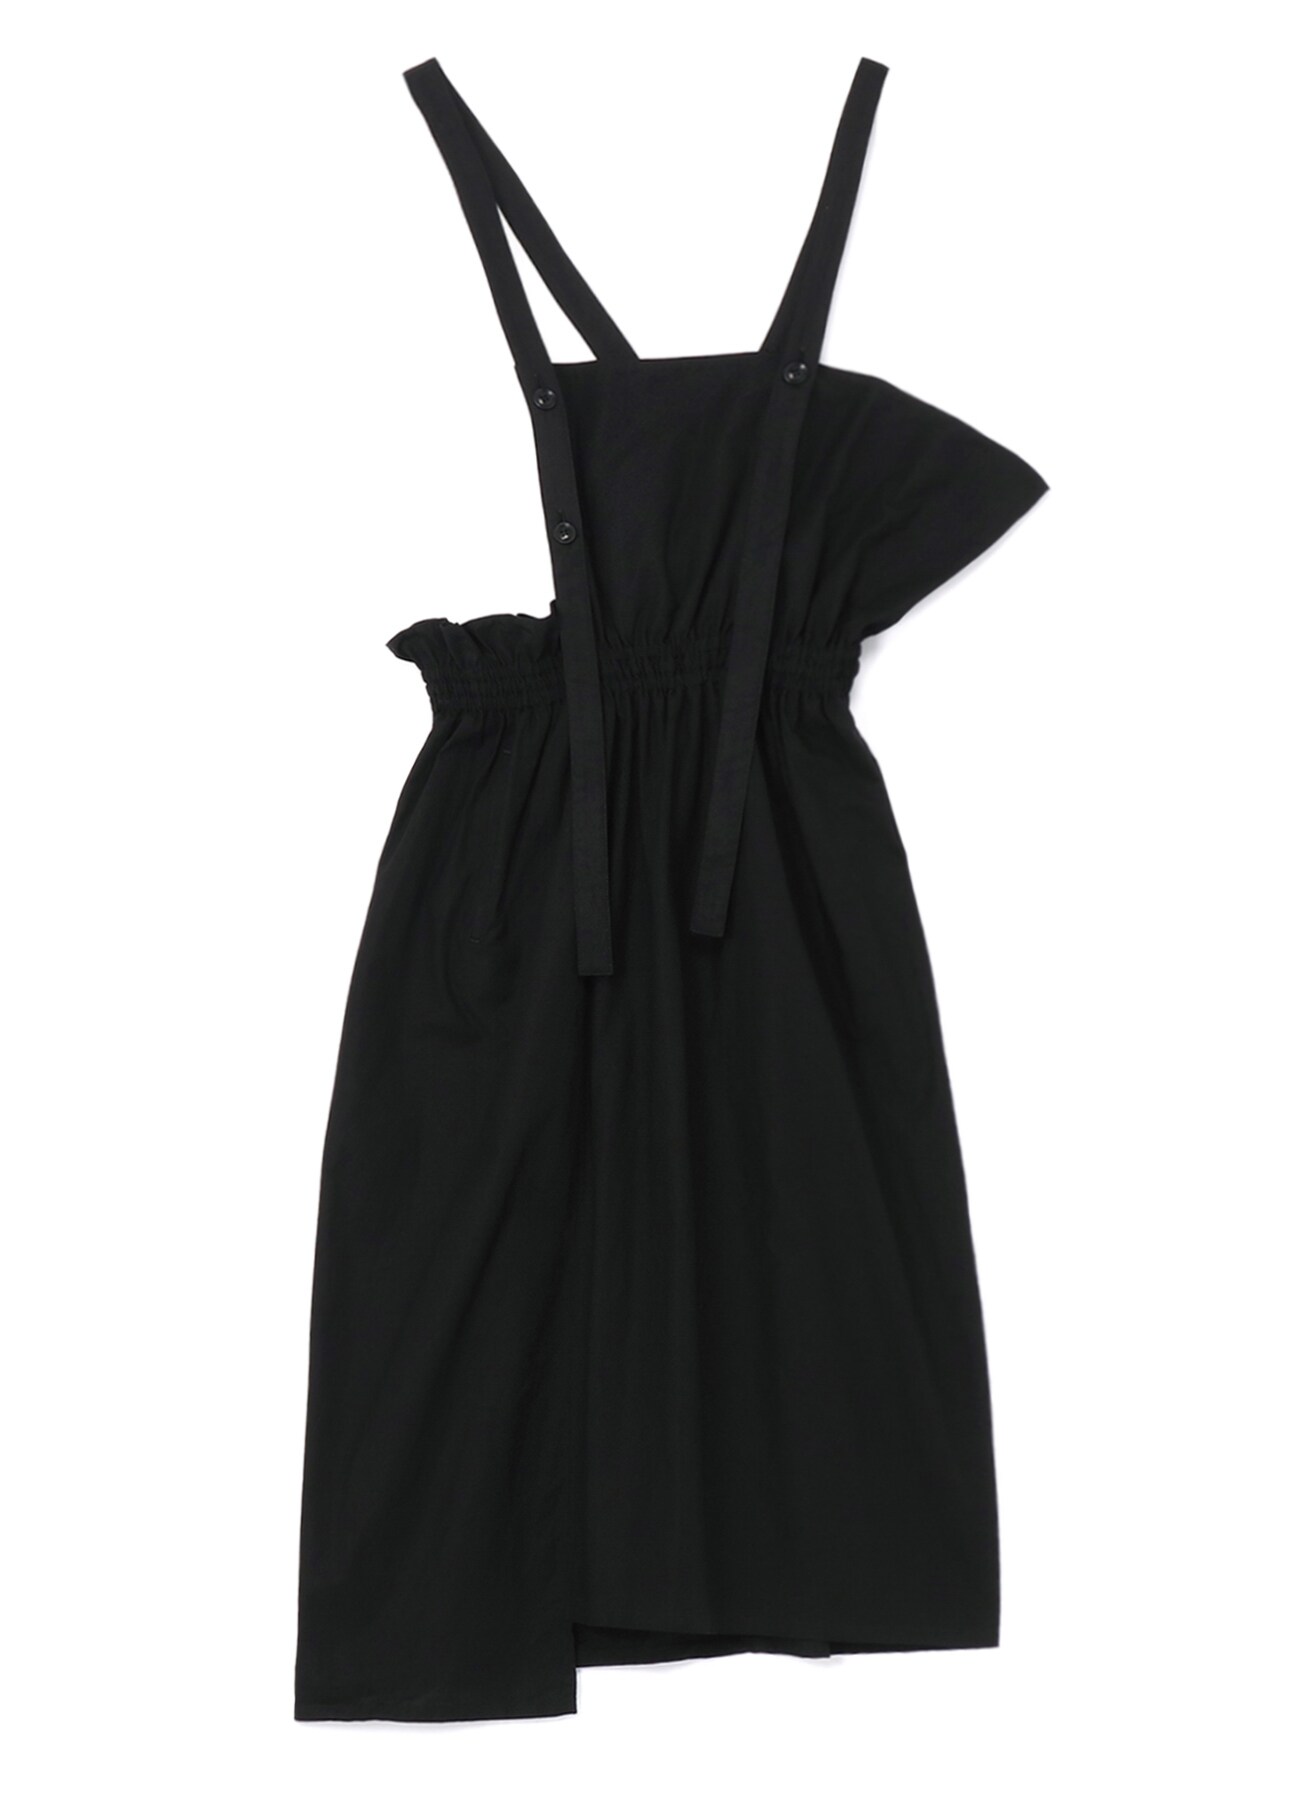 COTTON DUNGAREE GATHERED DRESS WITH SHOULDER STRAPS